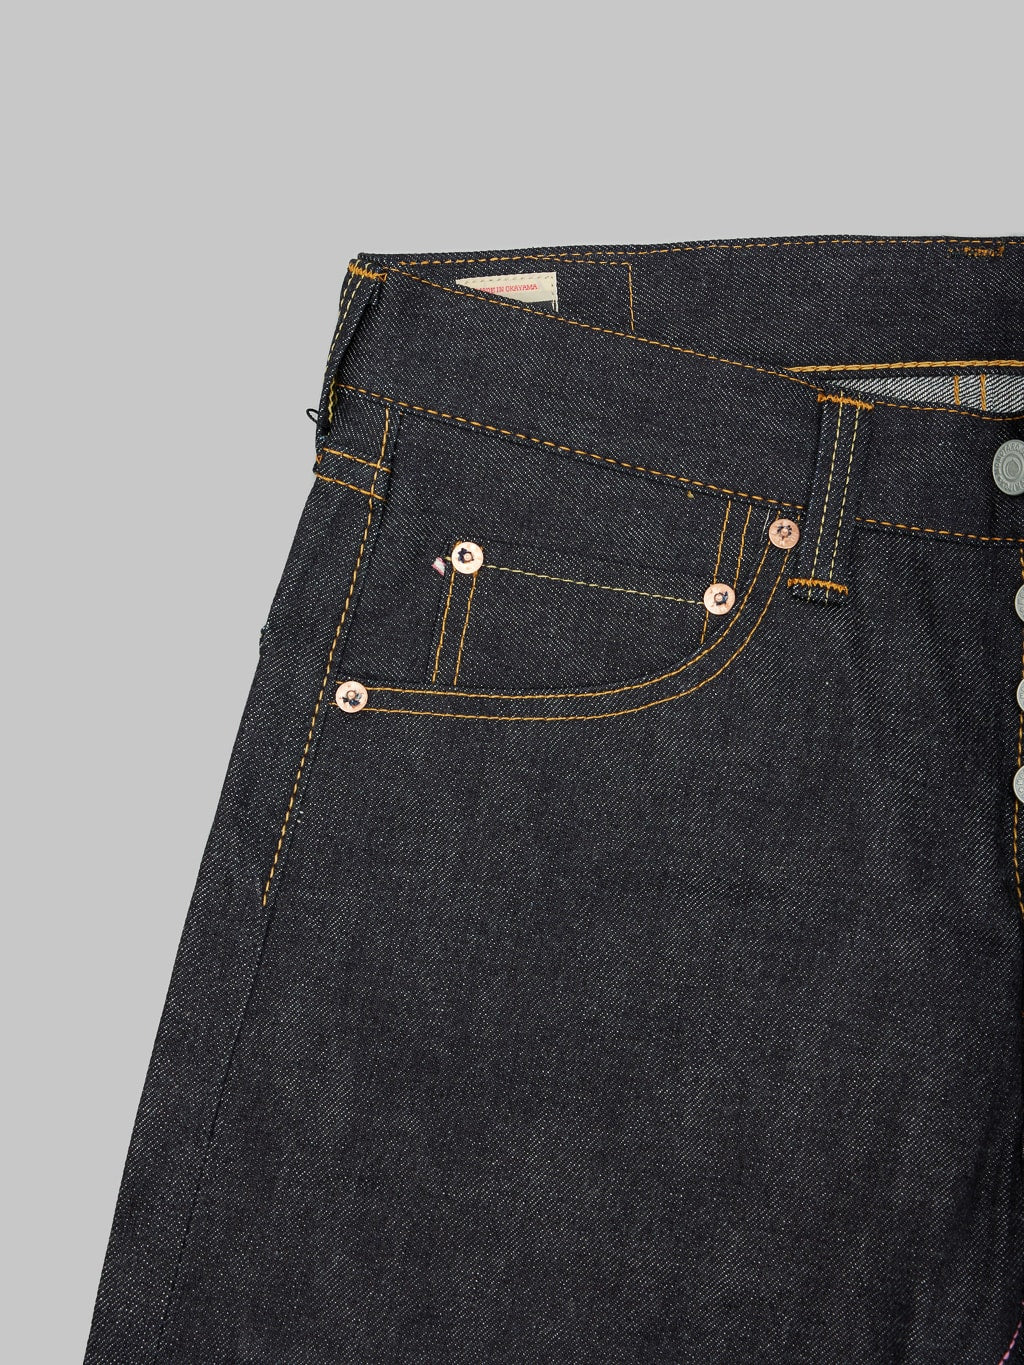 Momotaro 0605 12 going to battle 12oz Natural Tapered Jeans coin pocket